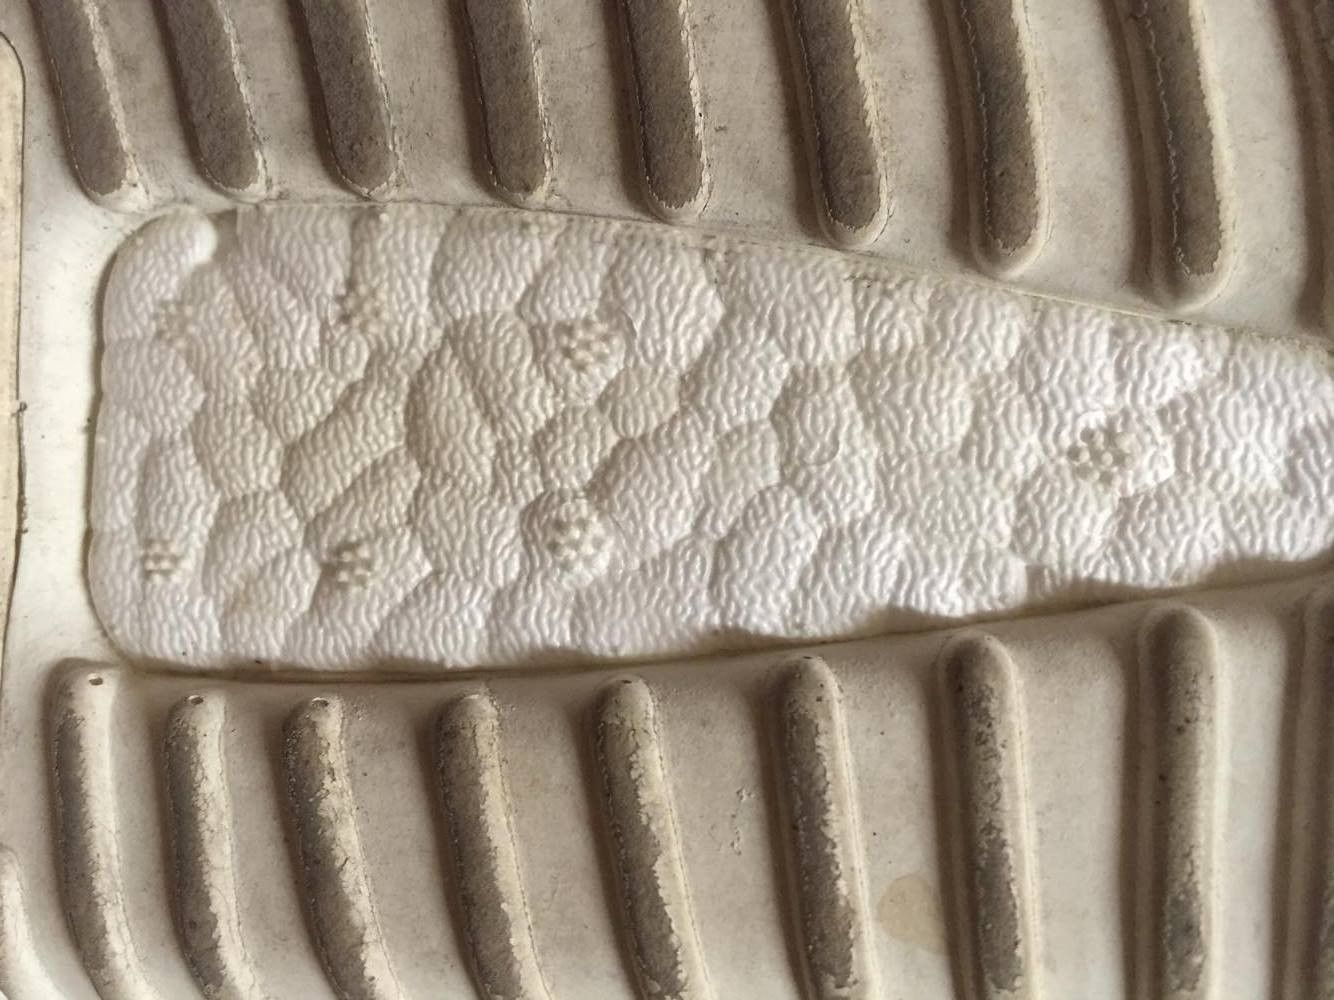 Adidas Yeezy Boost 350 US10 Size US 10 / EU 43 - 7 Preview